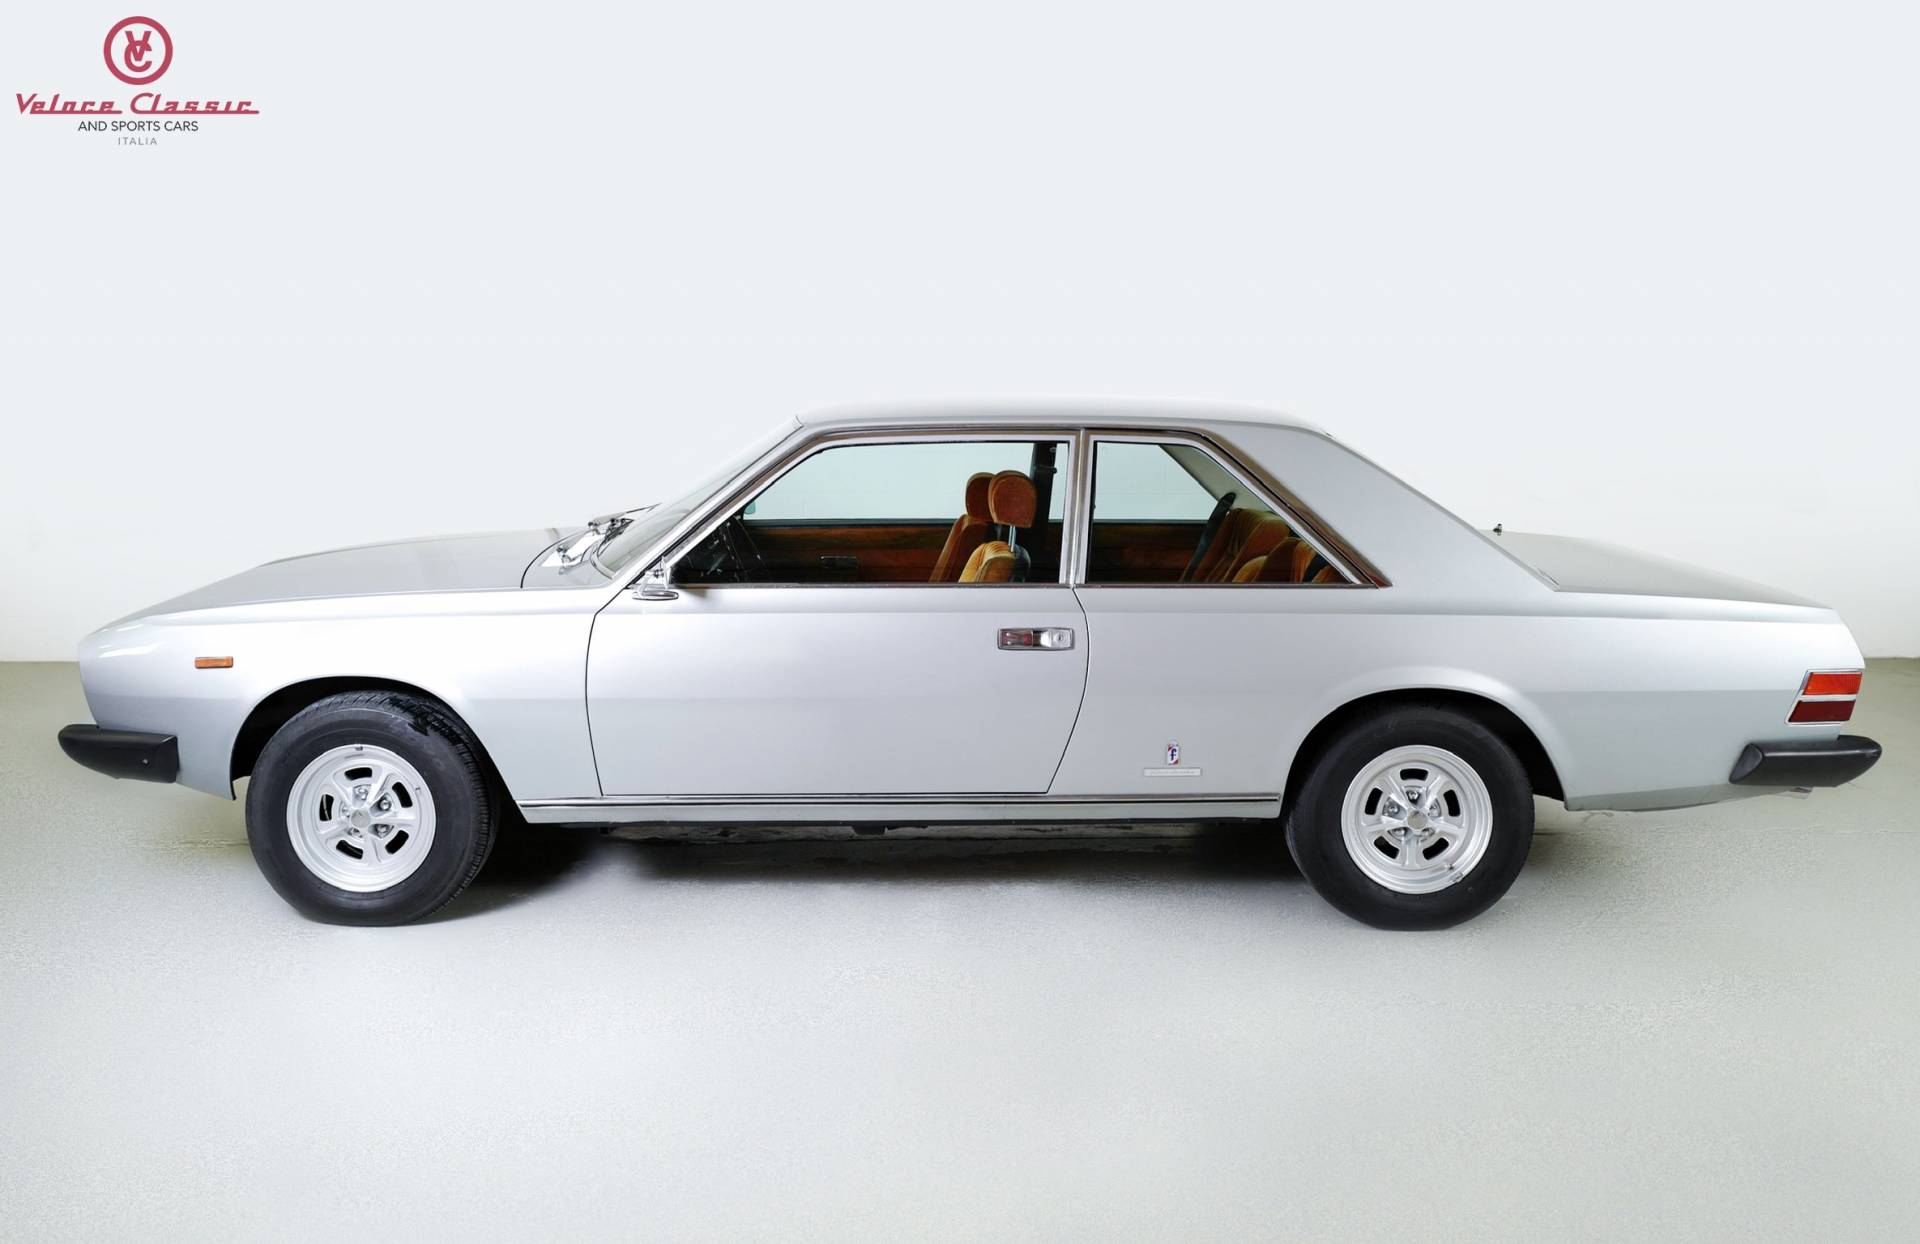 For Sale FIAT 130 Coupé (1972) offered for GBP 17,259